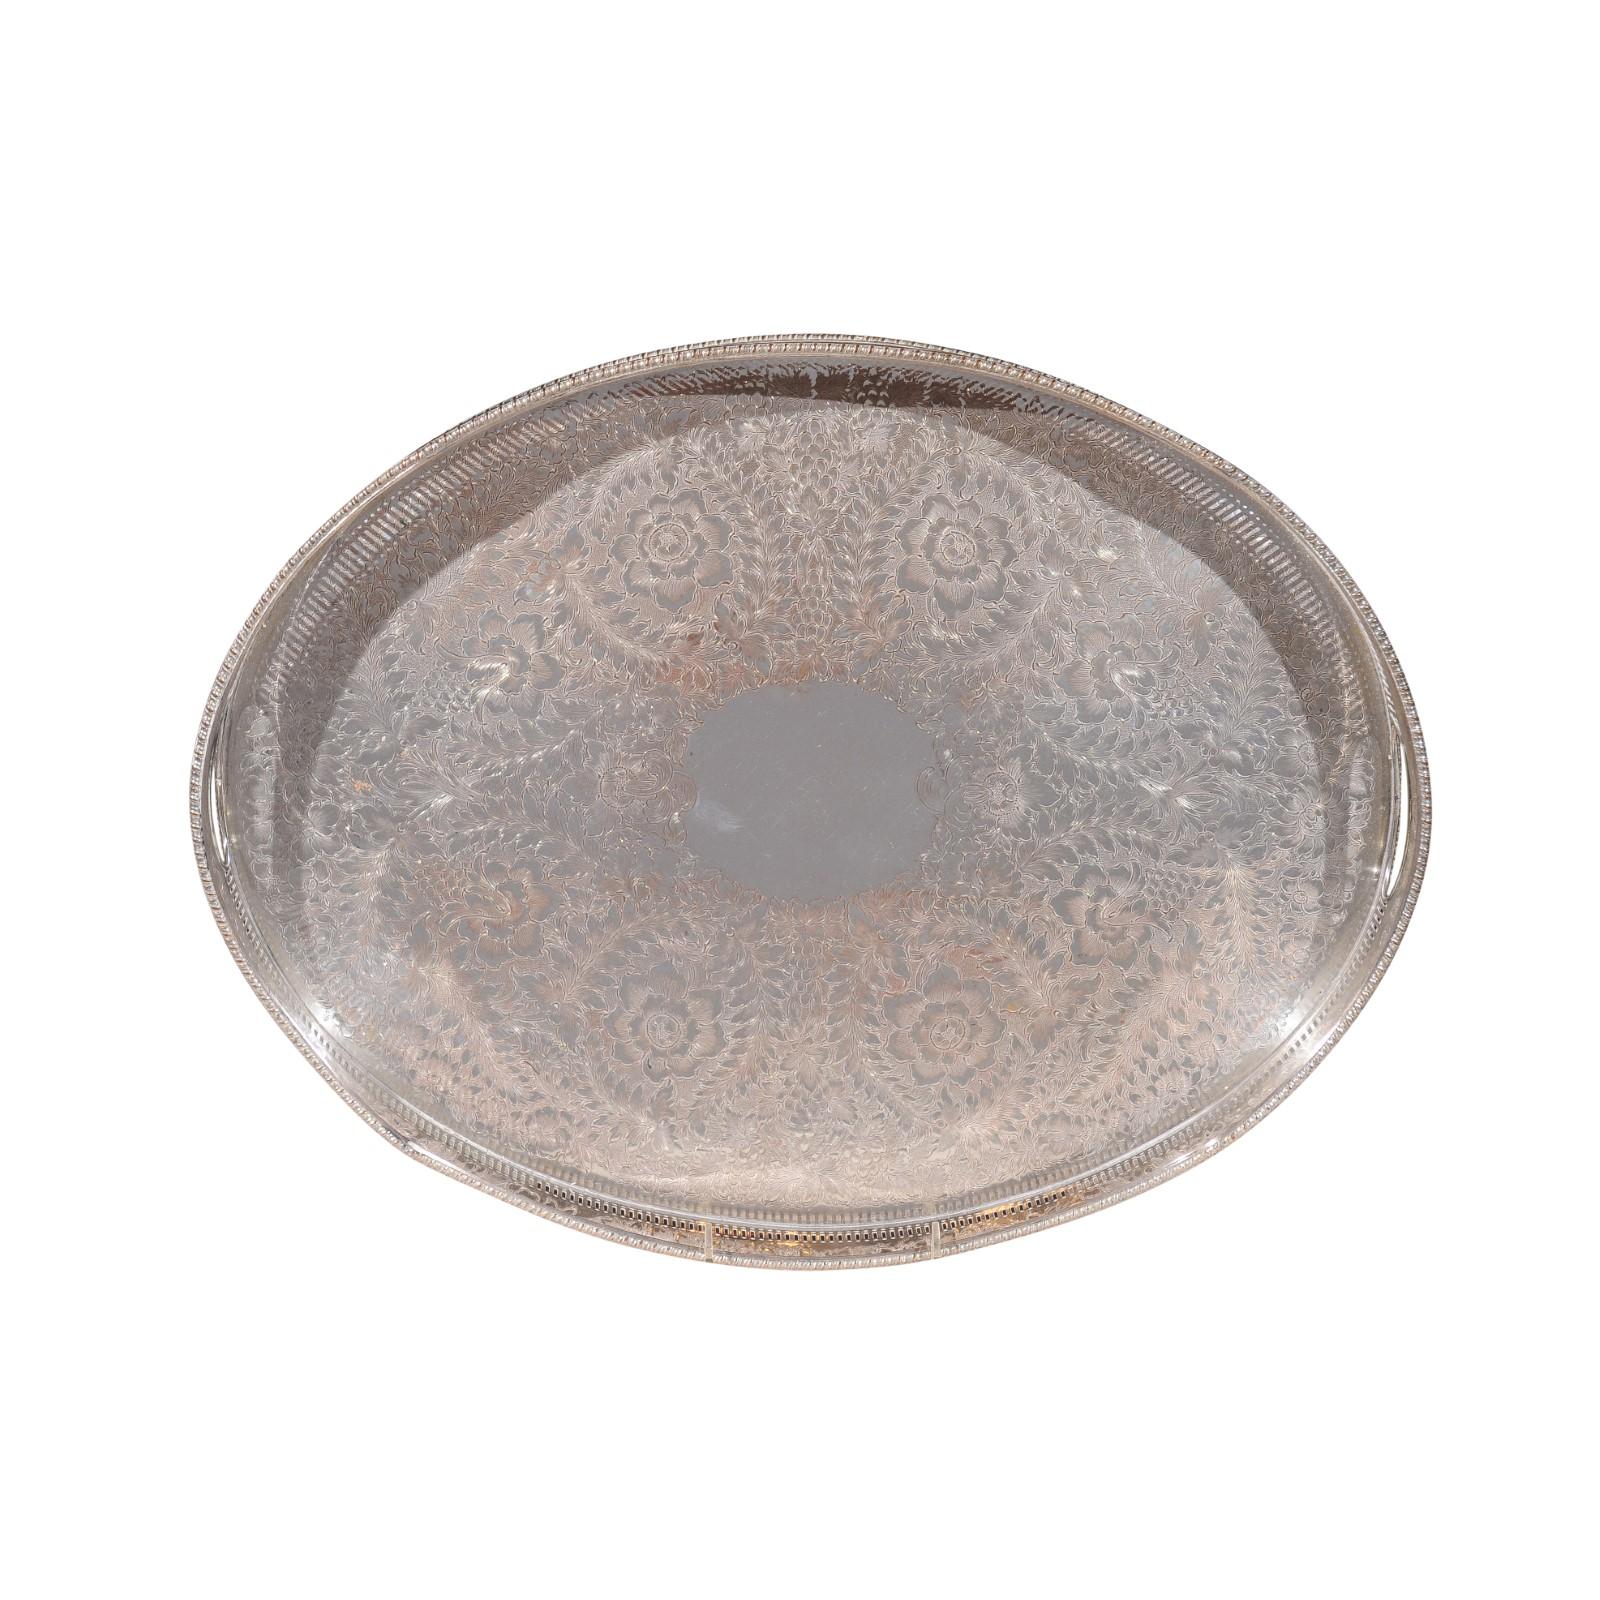 An English Edwardian period oval silver plated tray from the early 20th century, with pierced border, floral motifs and petite scrolling feet. Born in England in the early years of King Edward VII's reign, this exquisite silver plated tray features